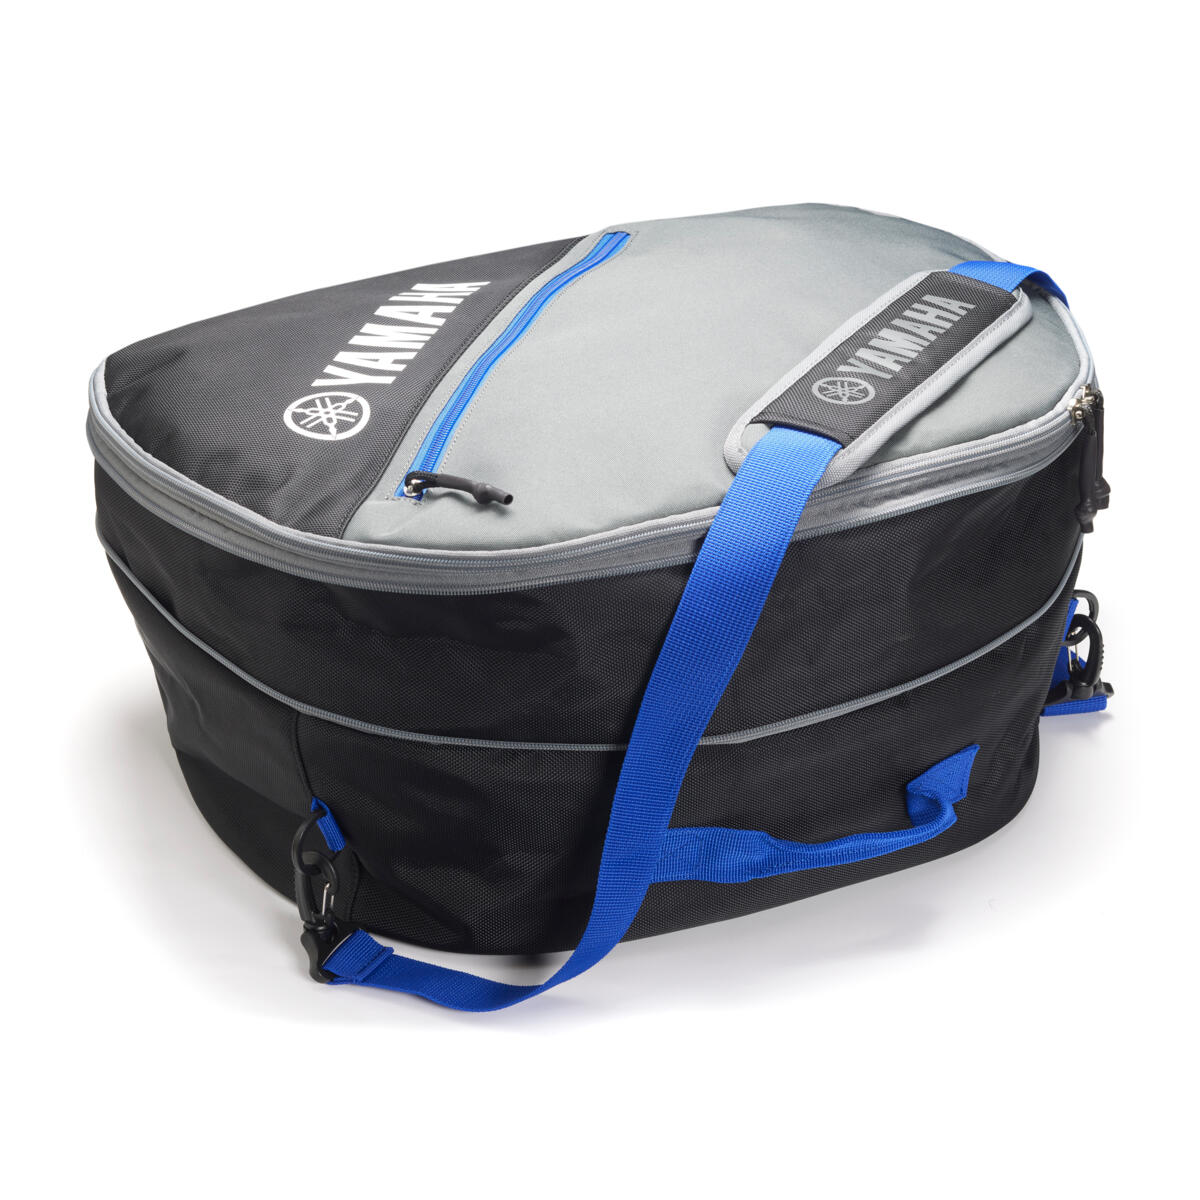 Fitted soft bag to put inside Yamaha 45L Top Case.